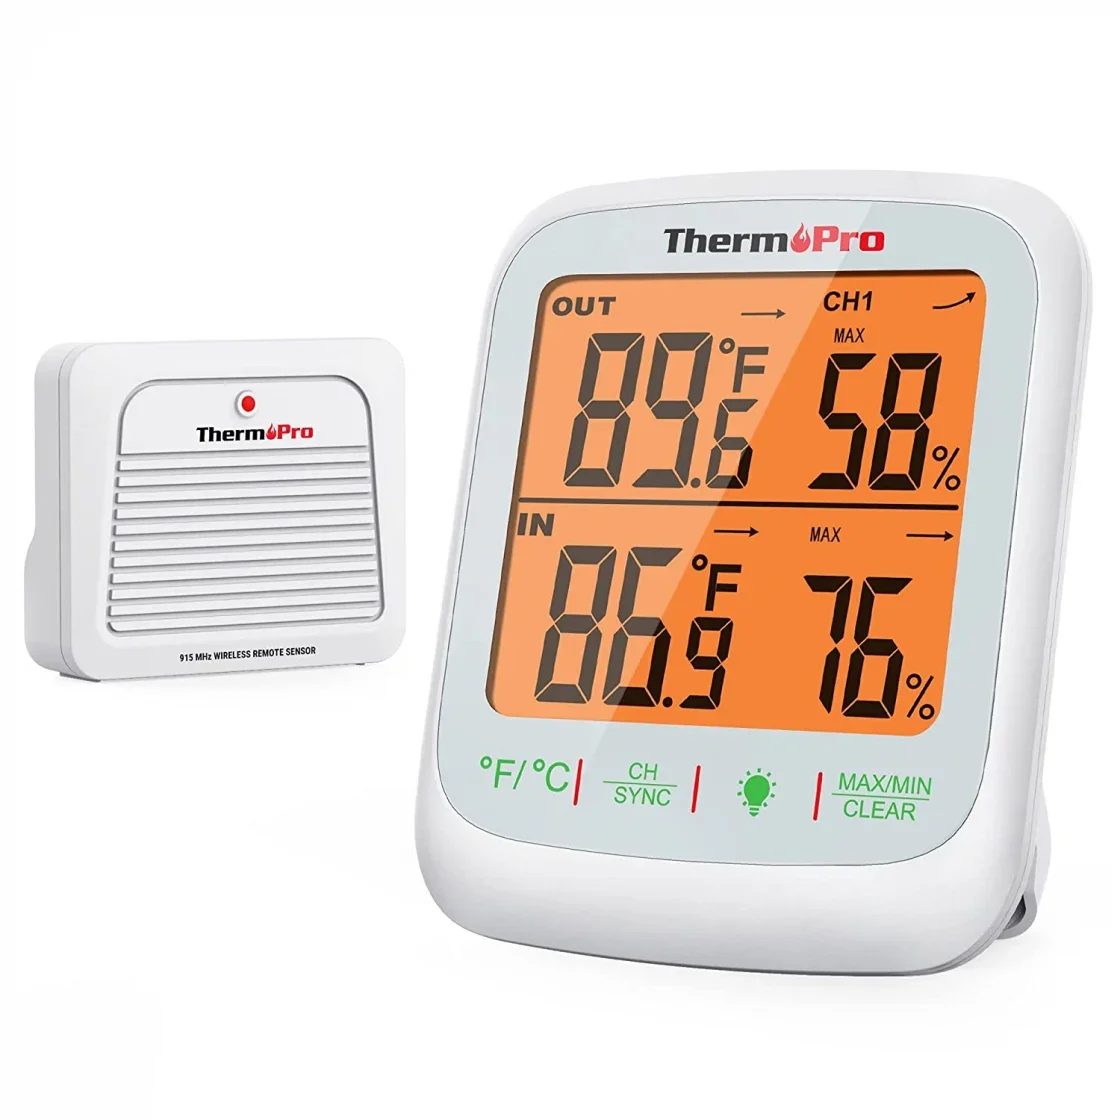 Pro Accuracy Indoor Temperature and Humidity Monitor with Alarms